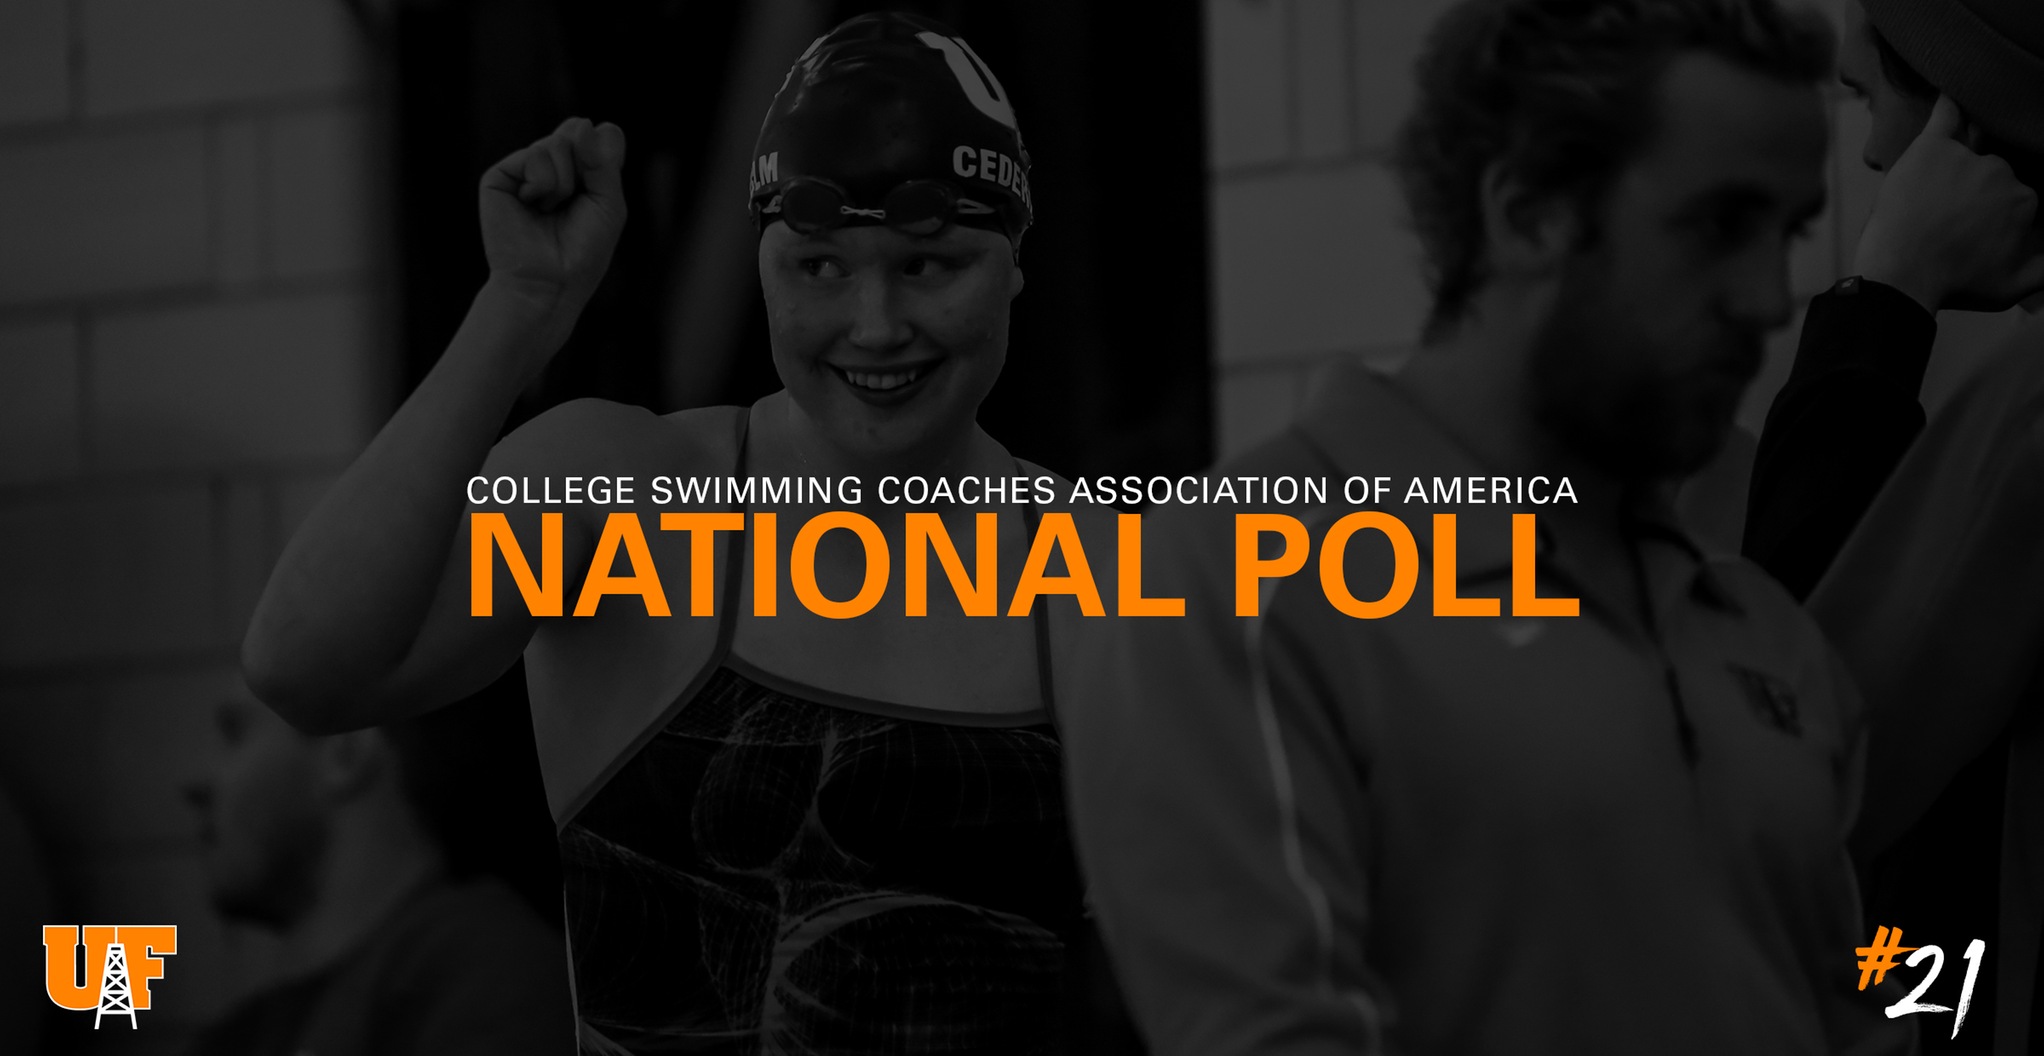 Oilers Ranked 21st in National Poll